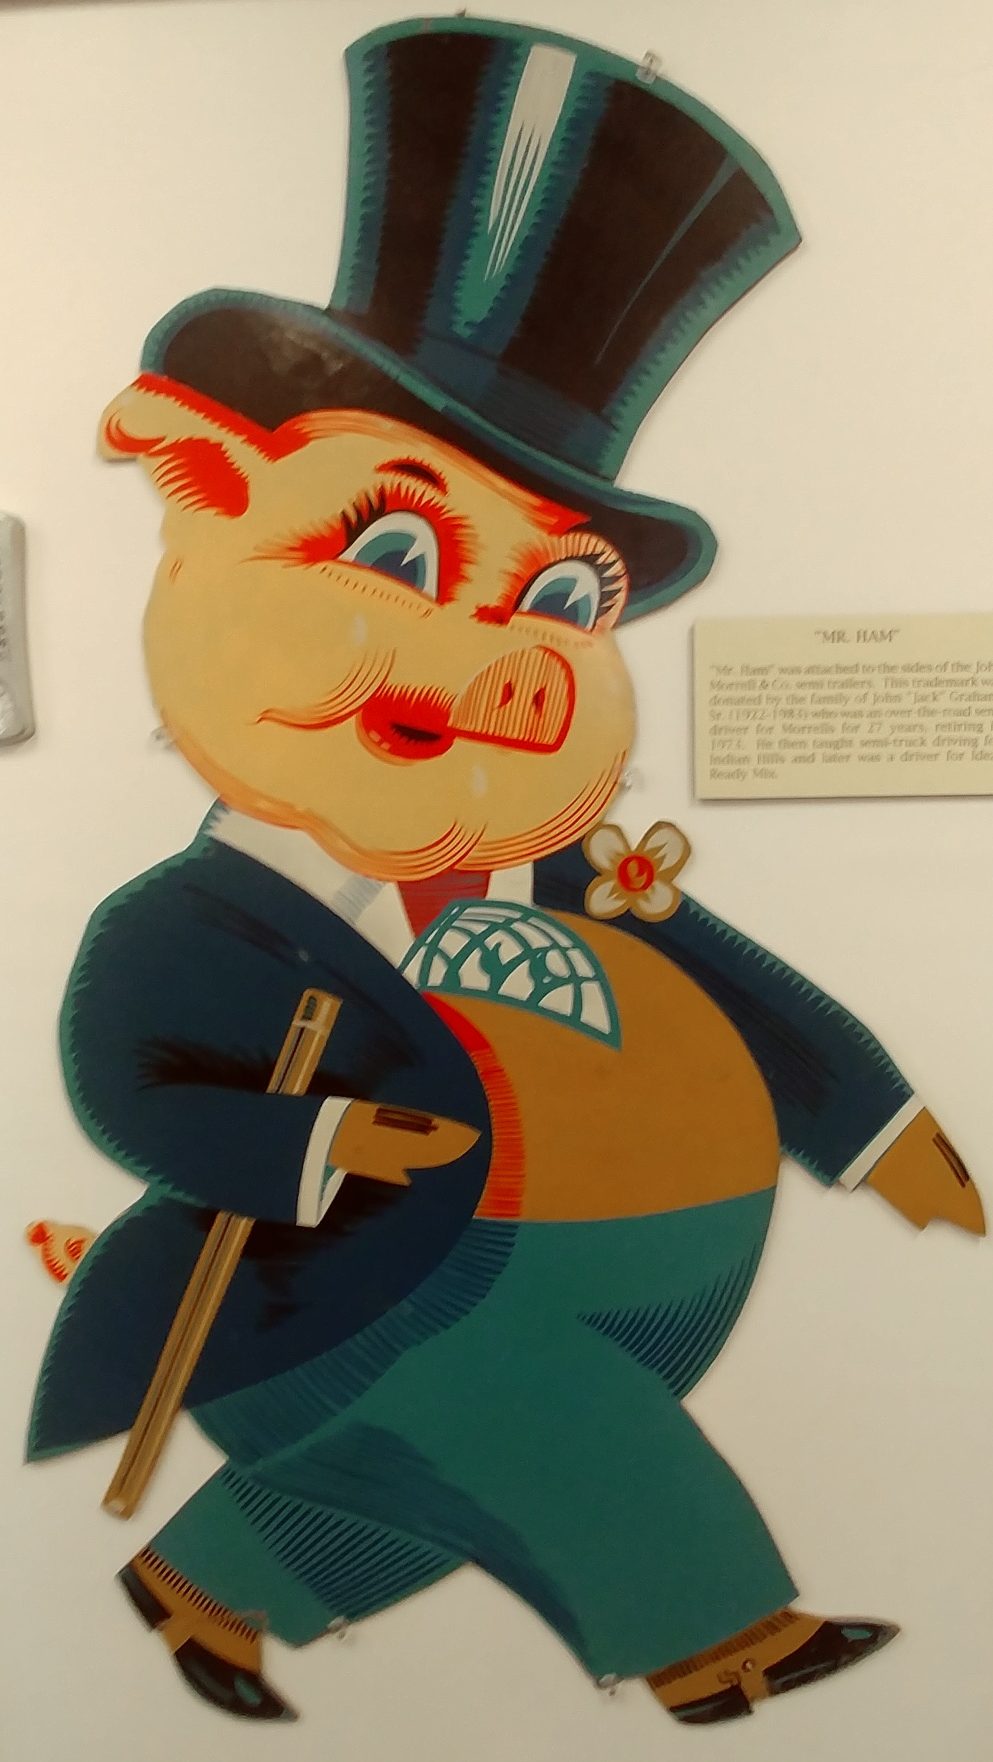 mr Ham from Wapello County Historical Museum